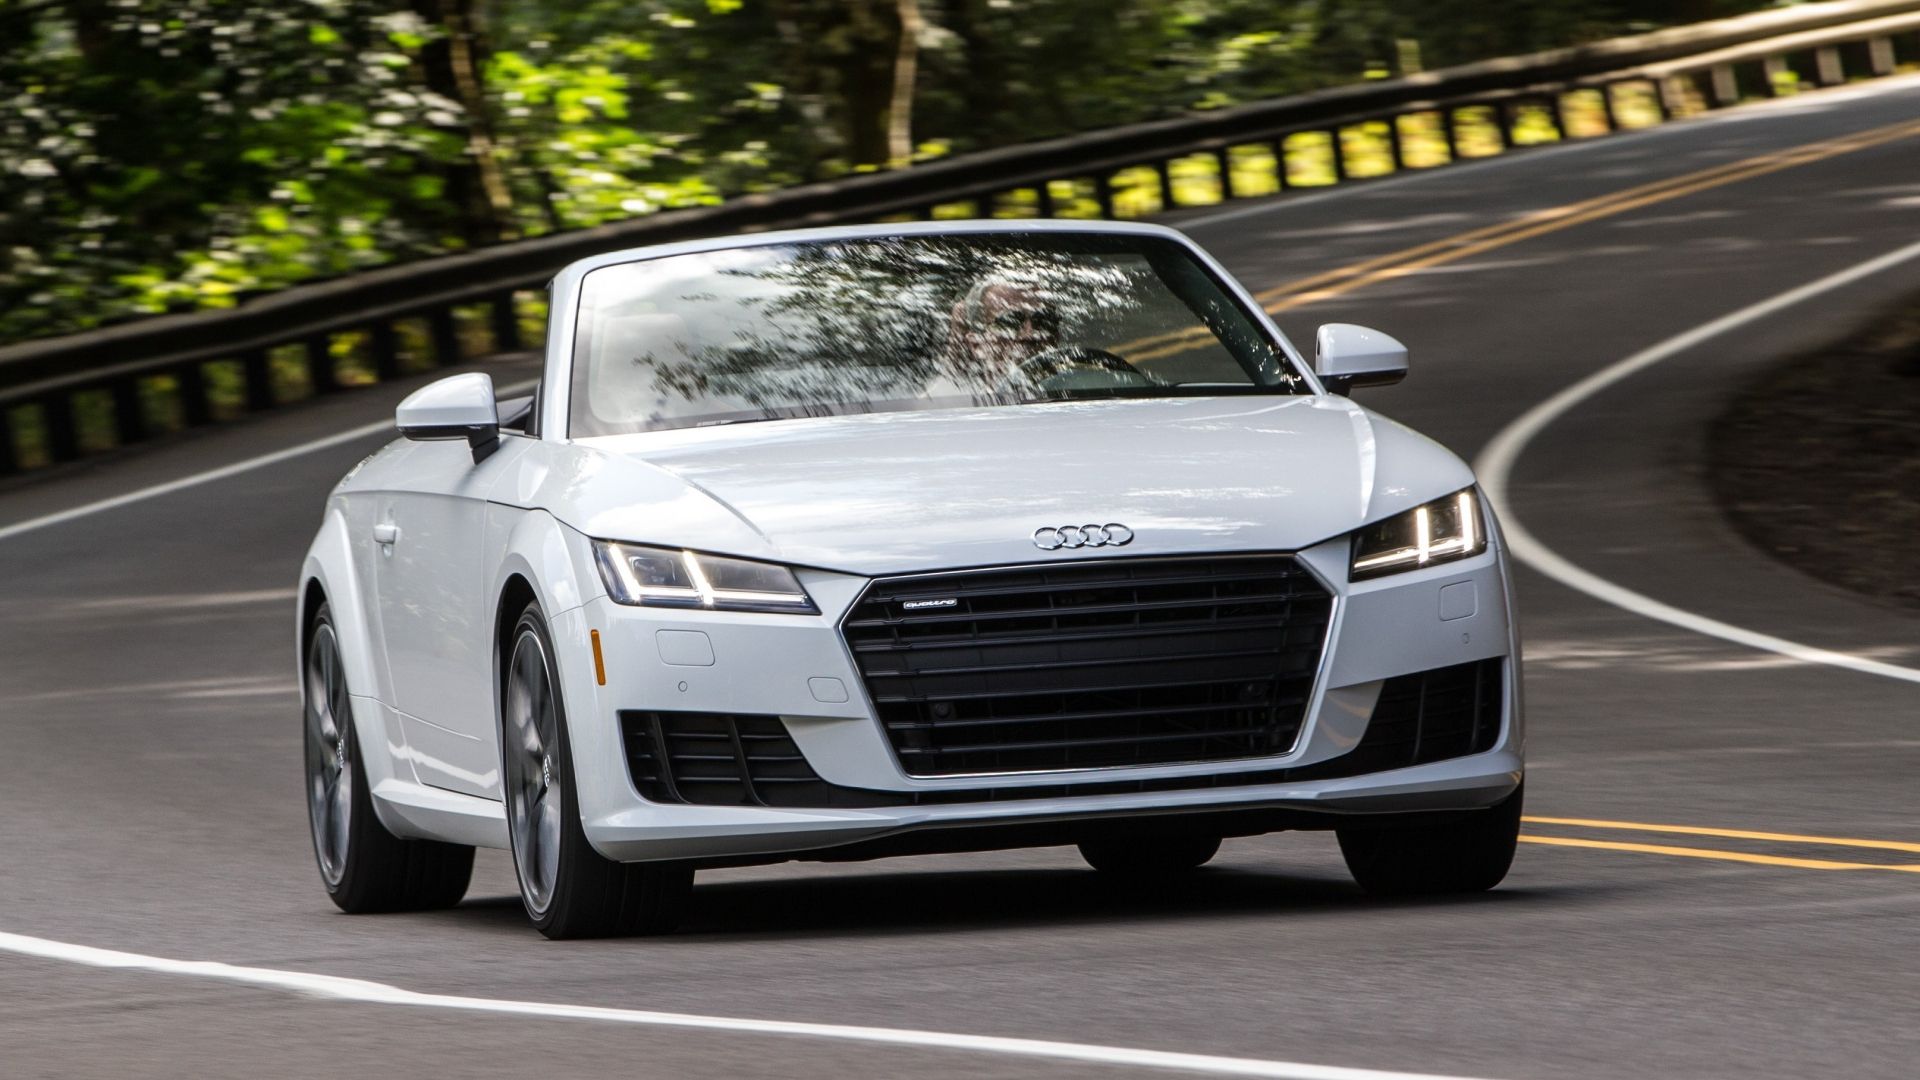 10 Audi Models With A History Of Durability And Longevity